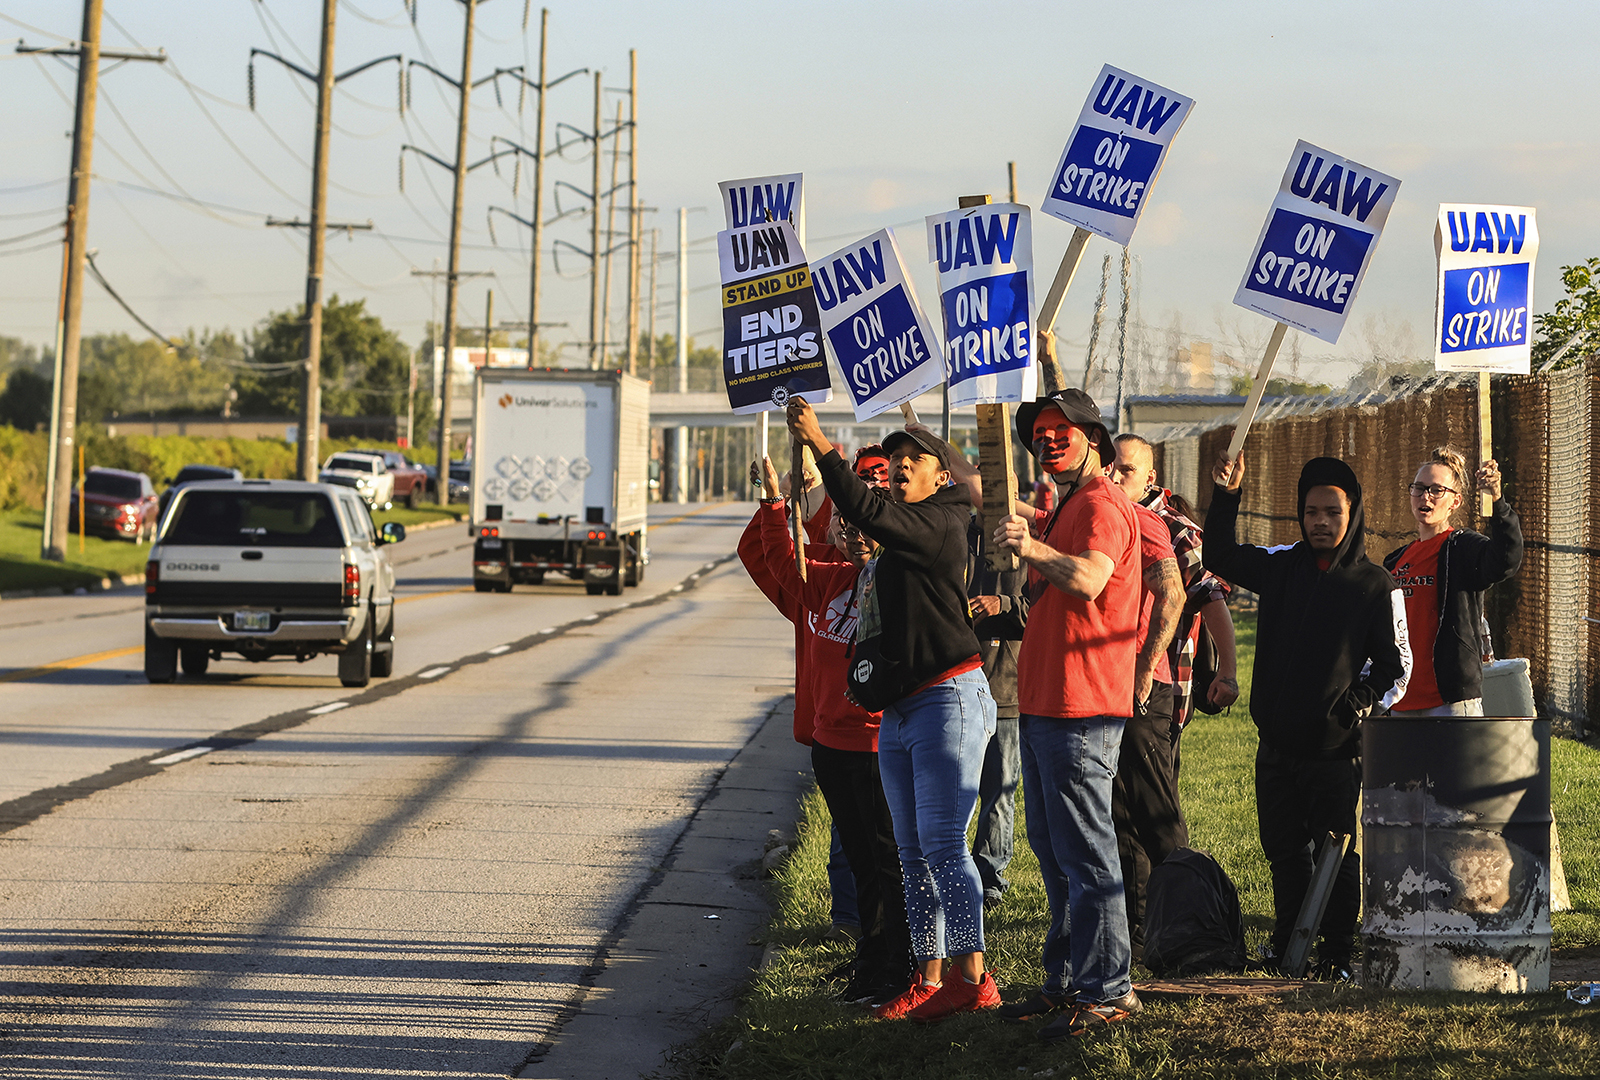 United Auto Workers hold signs while on strike at the Stellantis Toledo Assembly Complex in Toledo, Ohio.